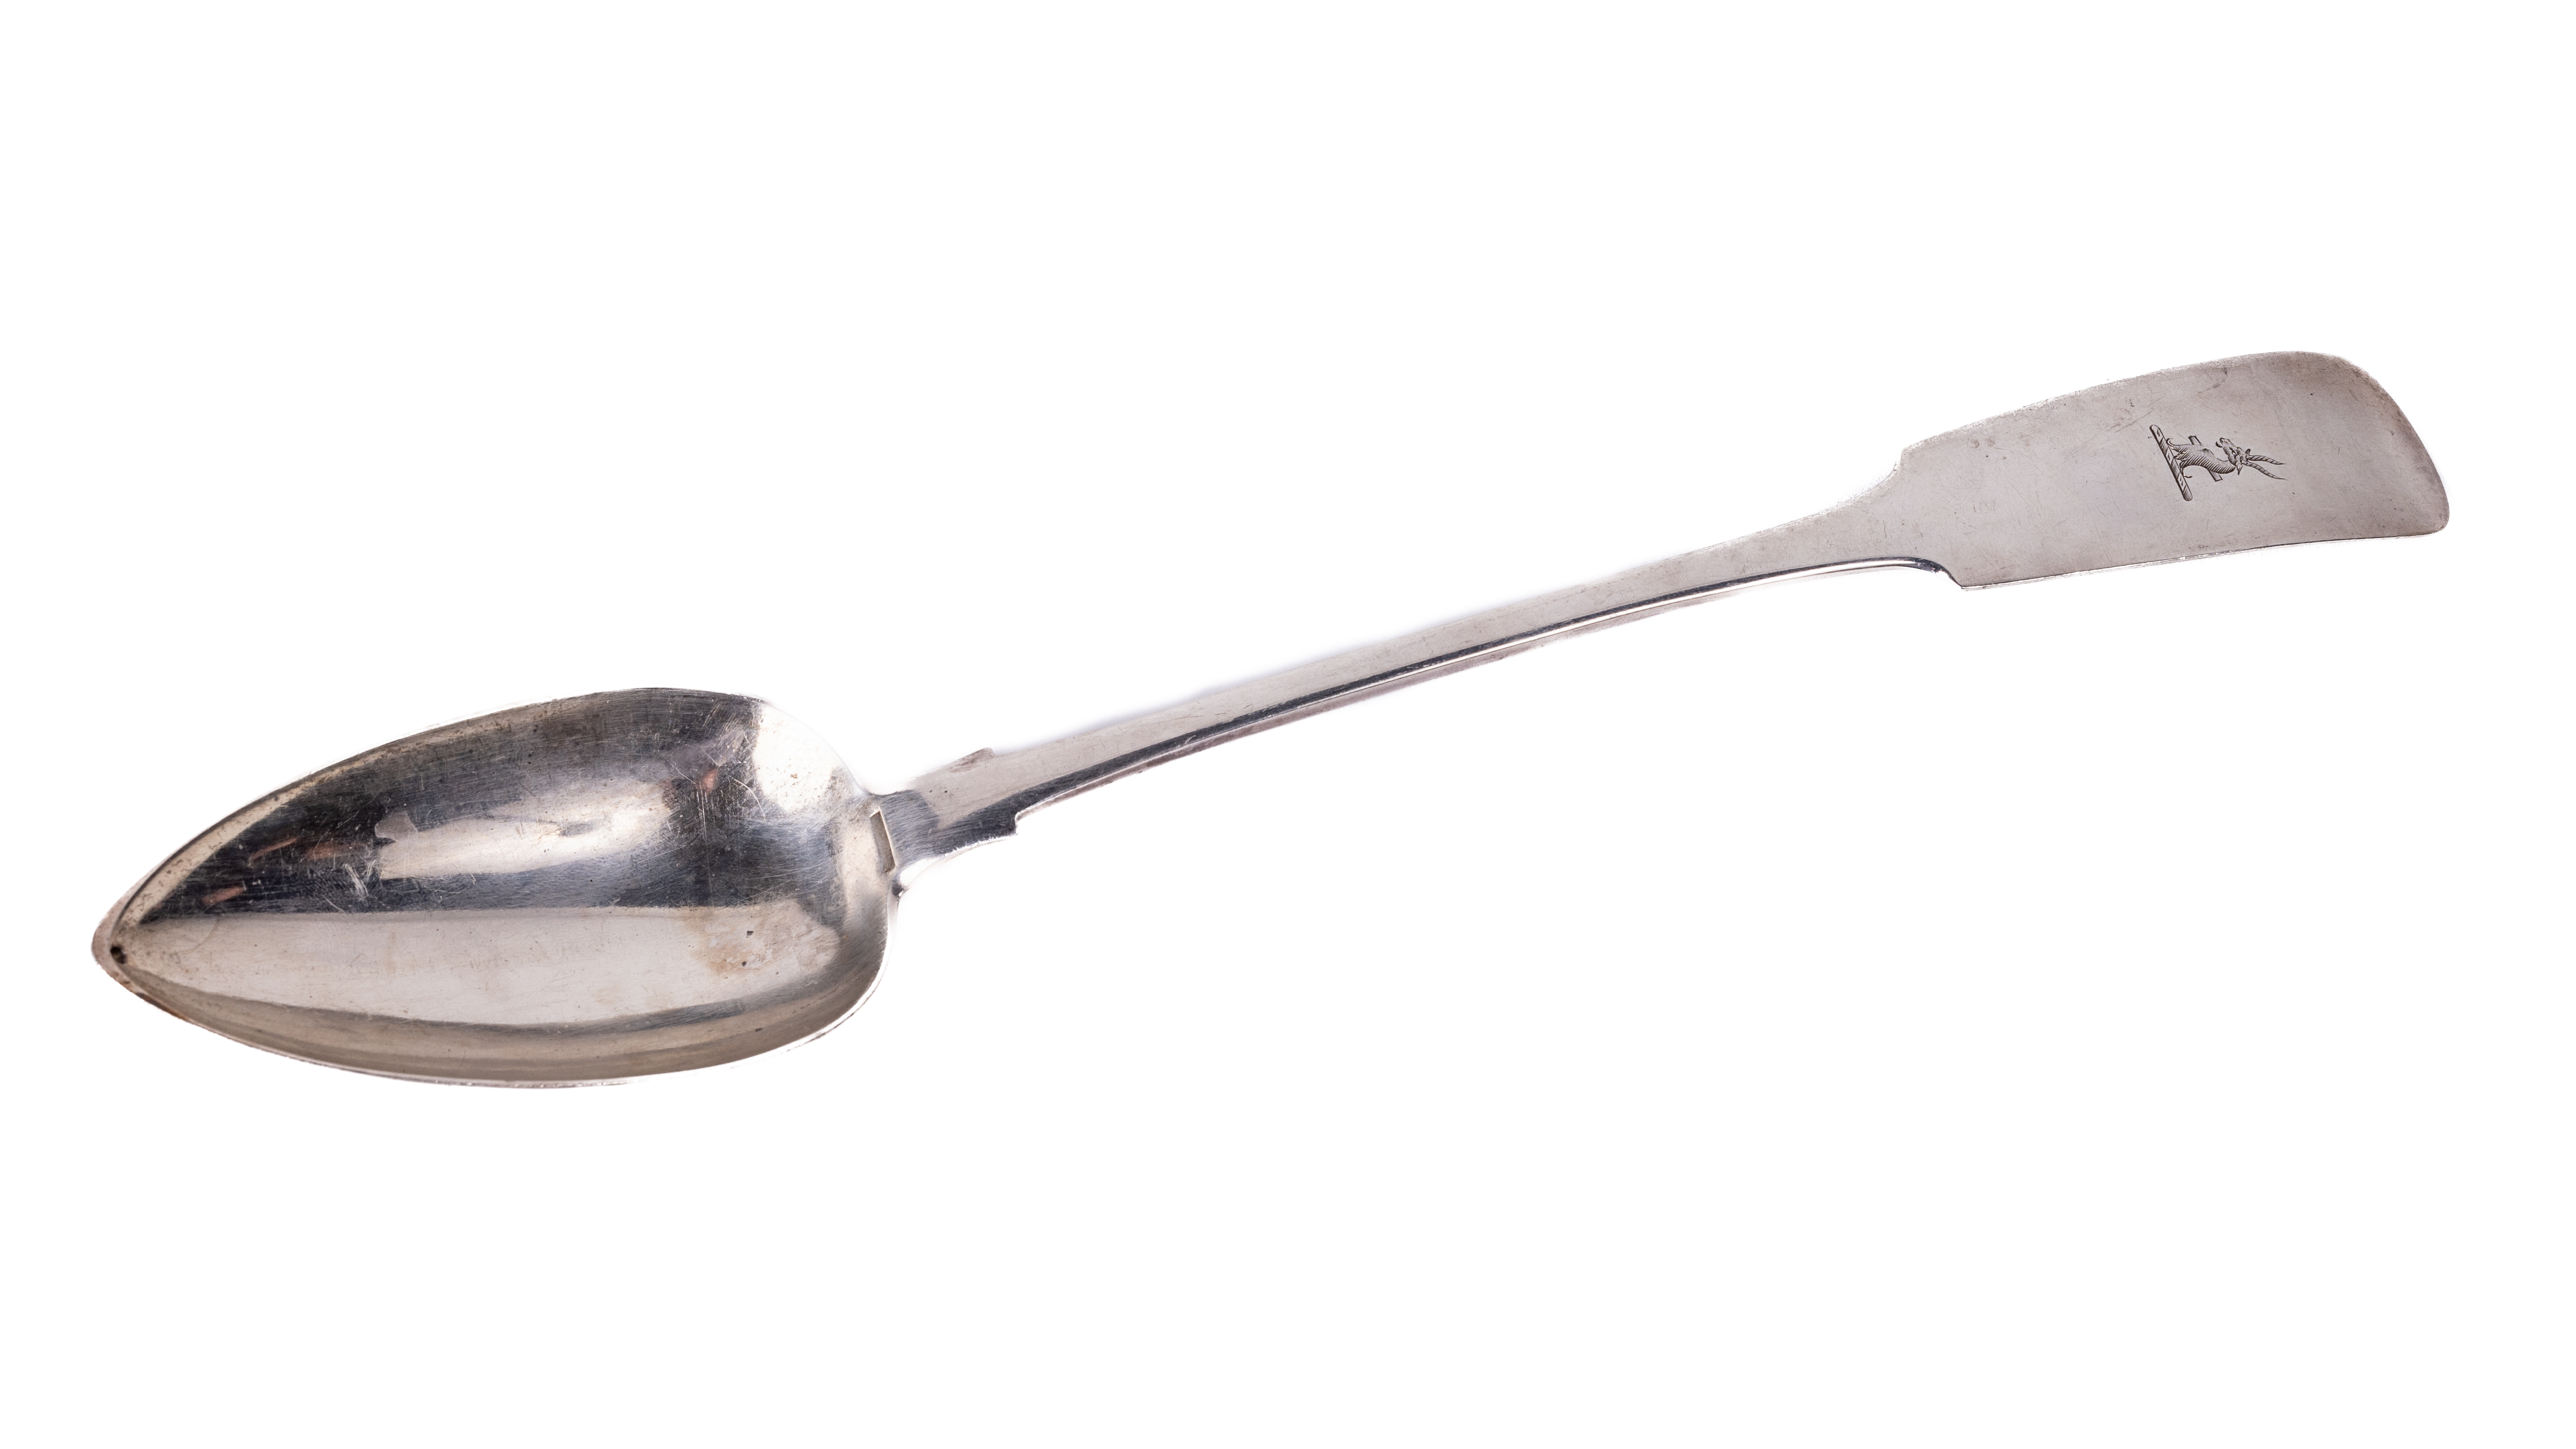 A rare Irish Georgian period Provincial fiddle pattern design silver Serving Spoon, (crested), by